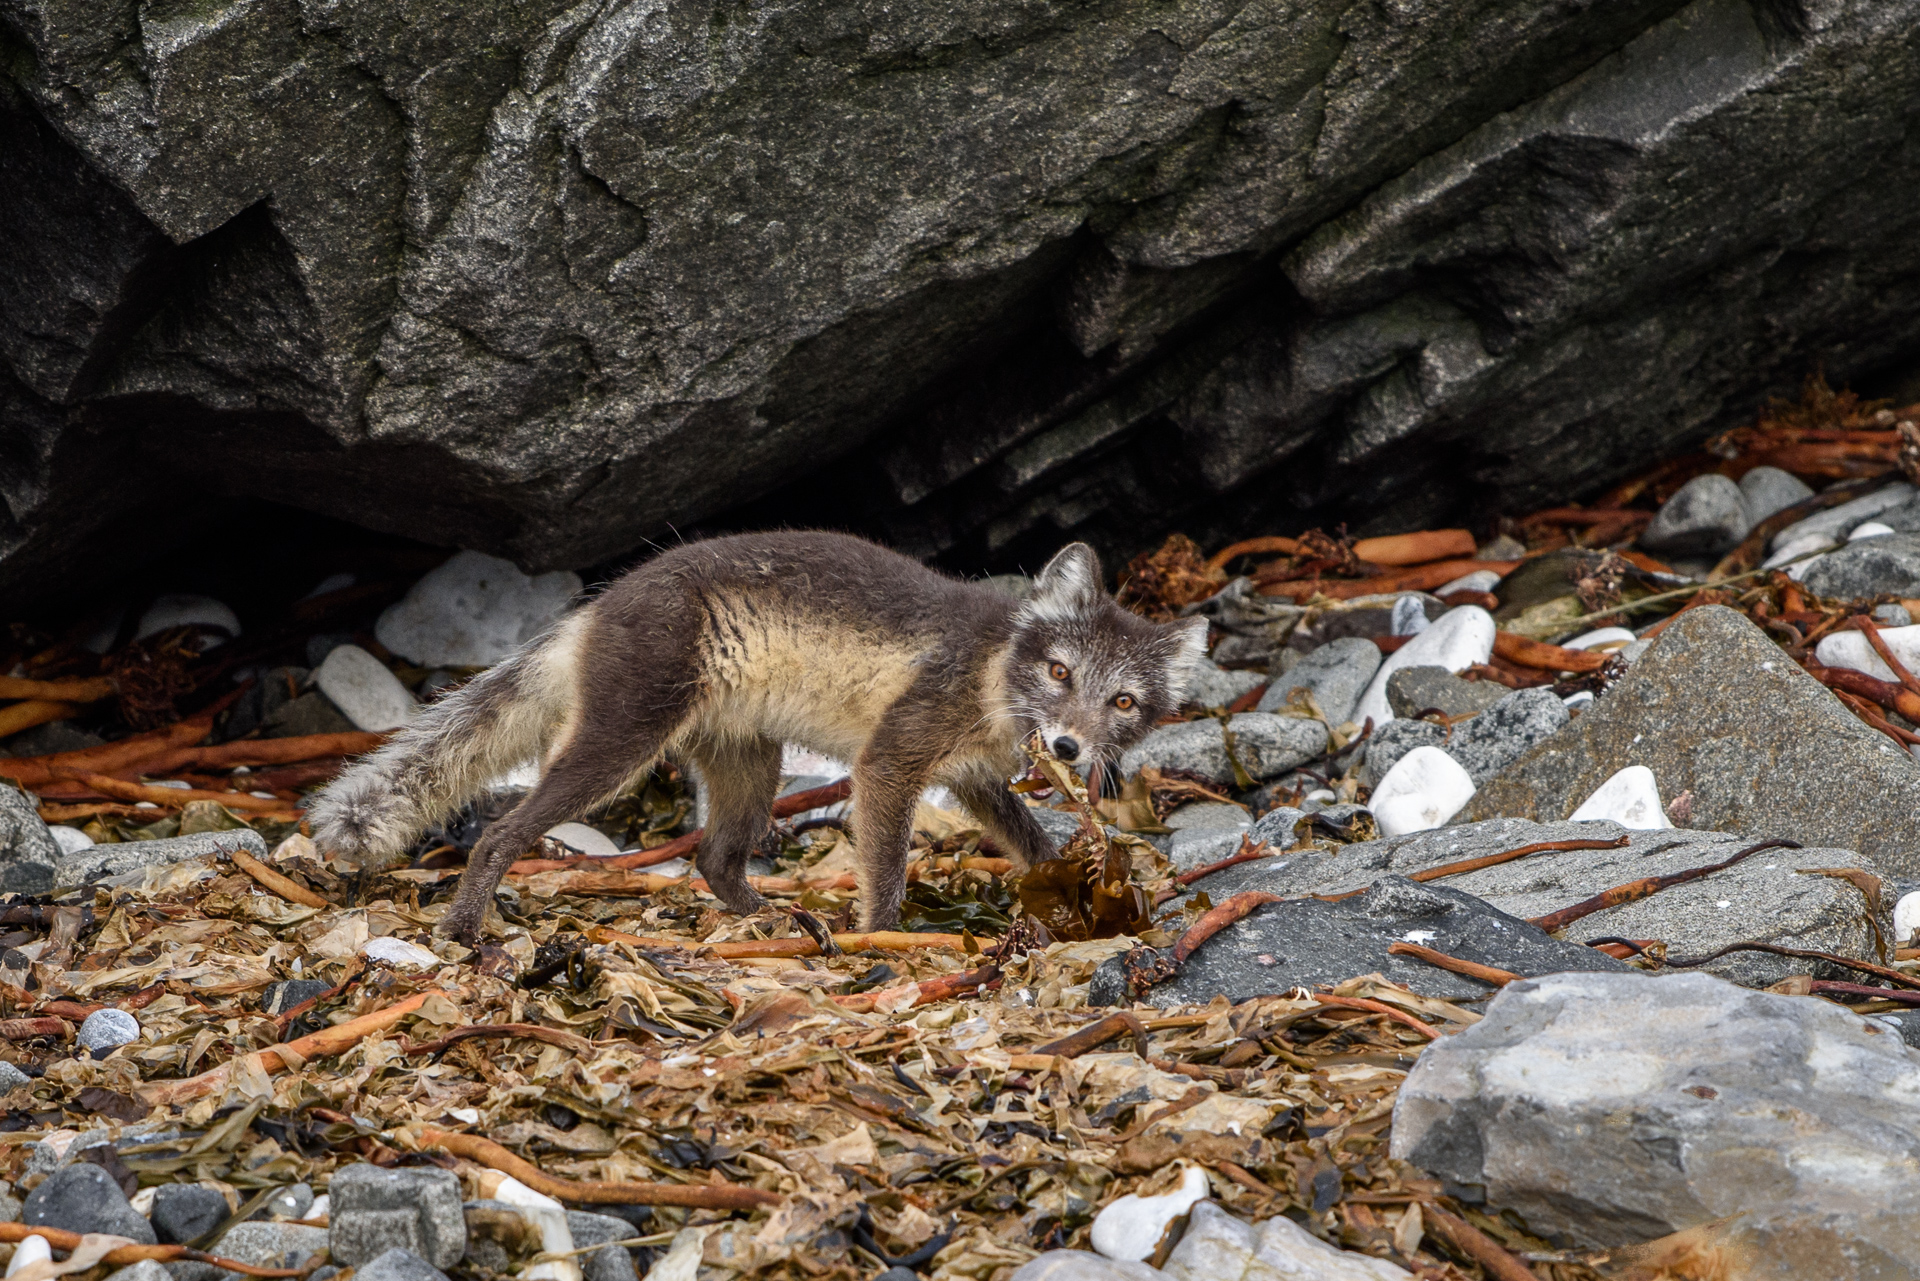 Arctic fox digging up an old skeleton at the beach under the cliffs